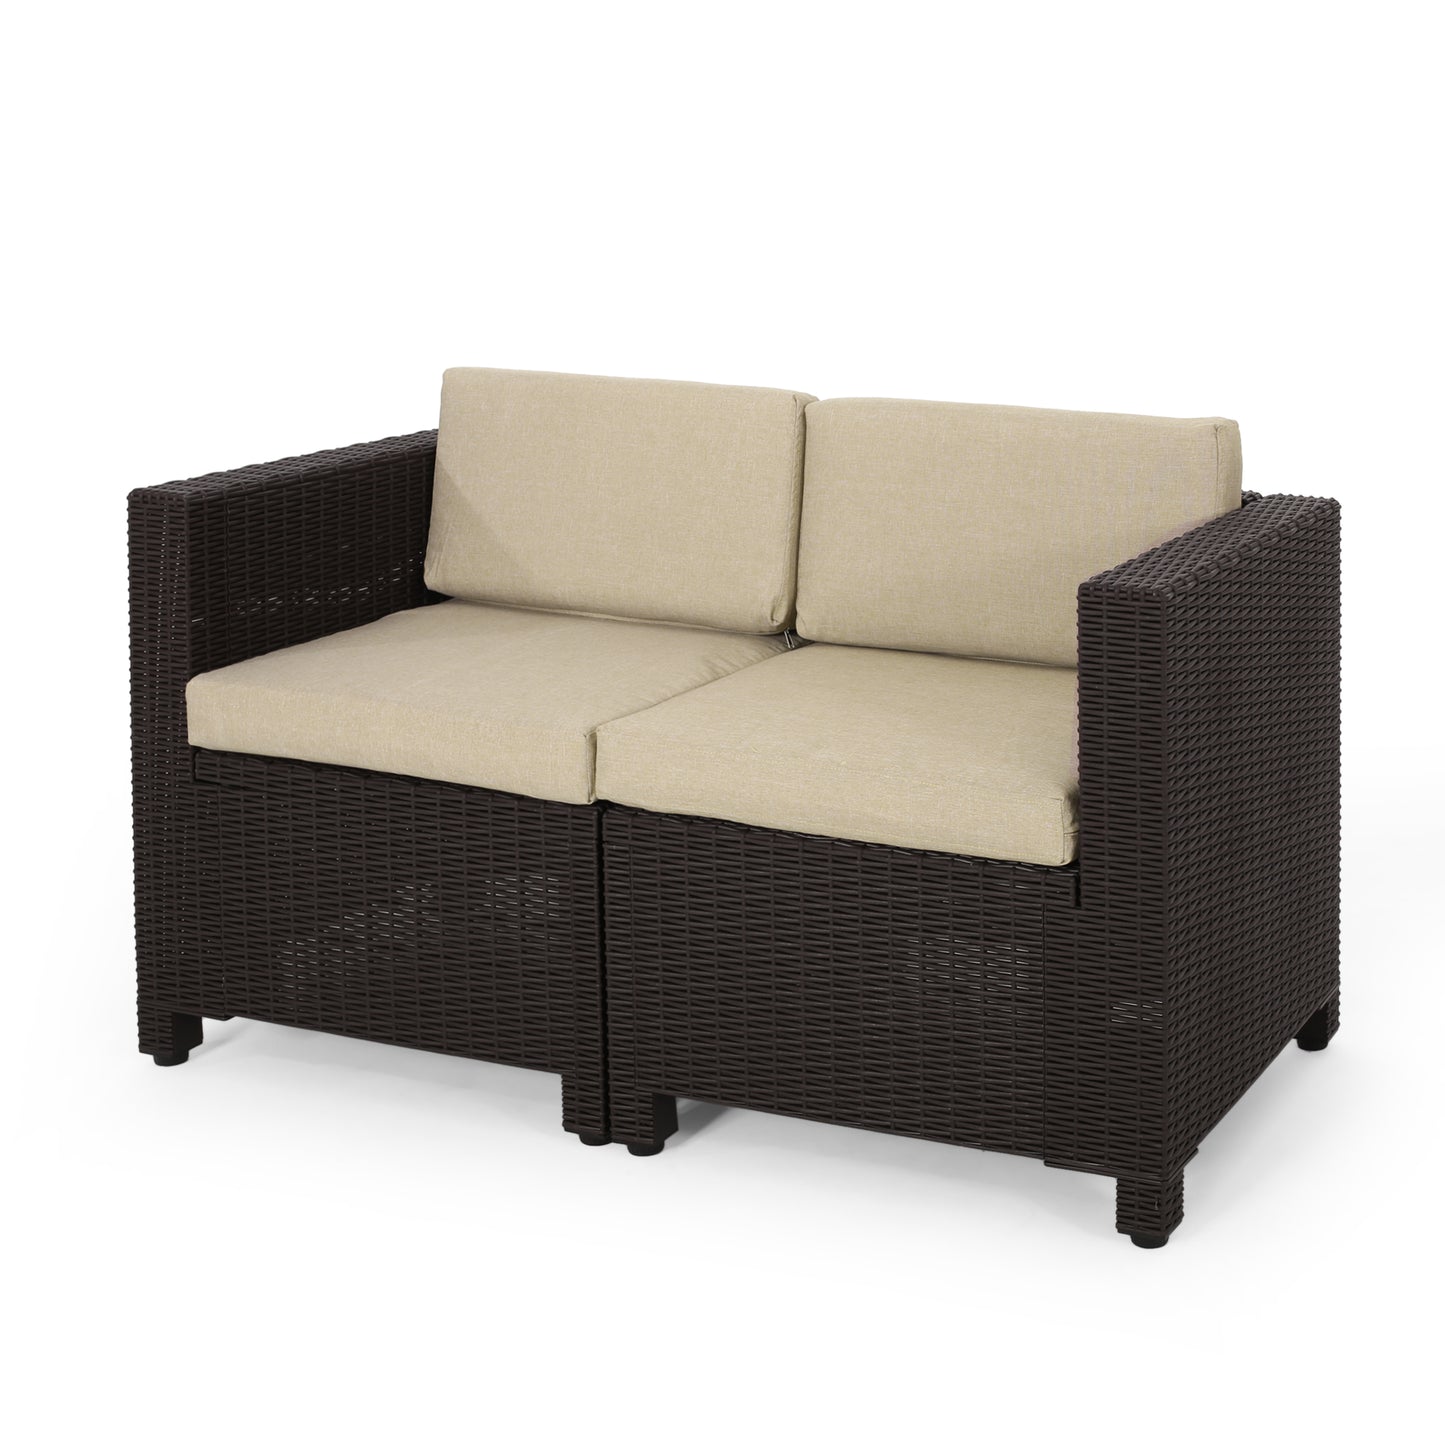 Farirra Outdoor Faux Wicker 8 Seater Chat Set with Cushions